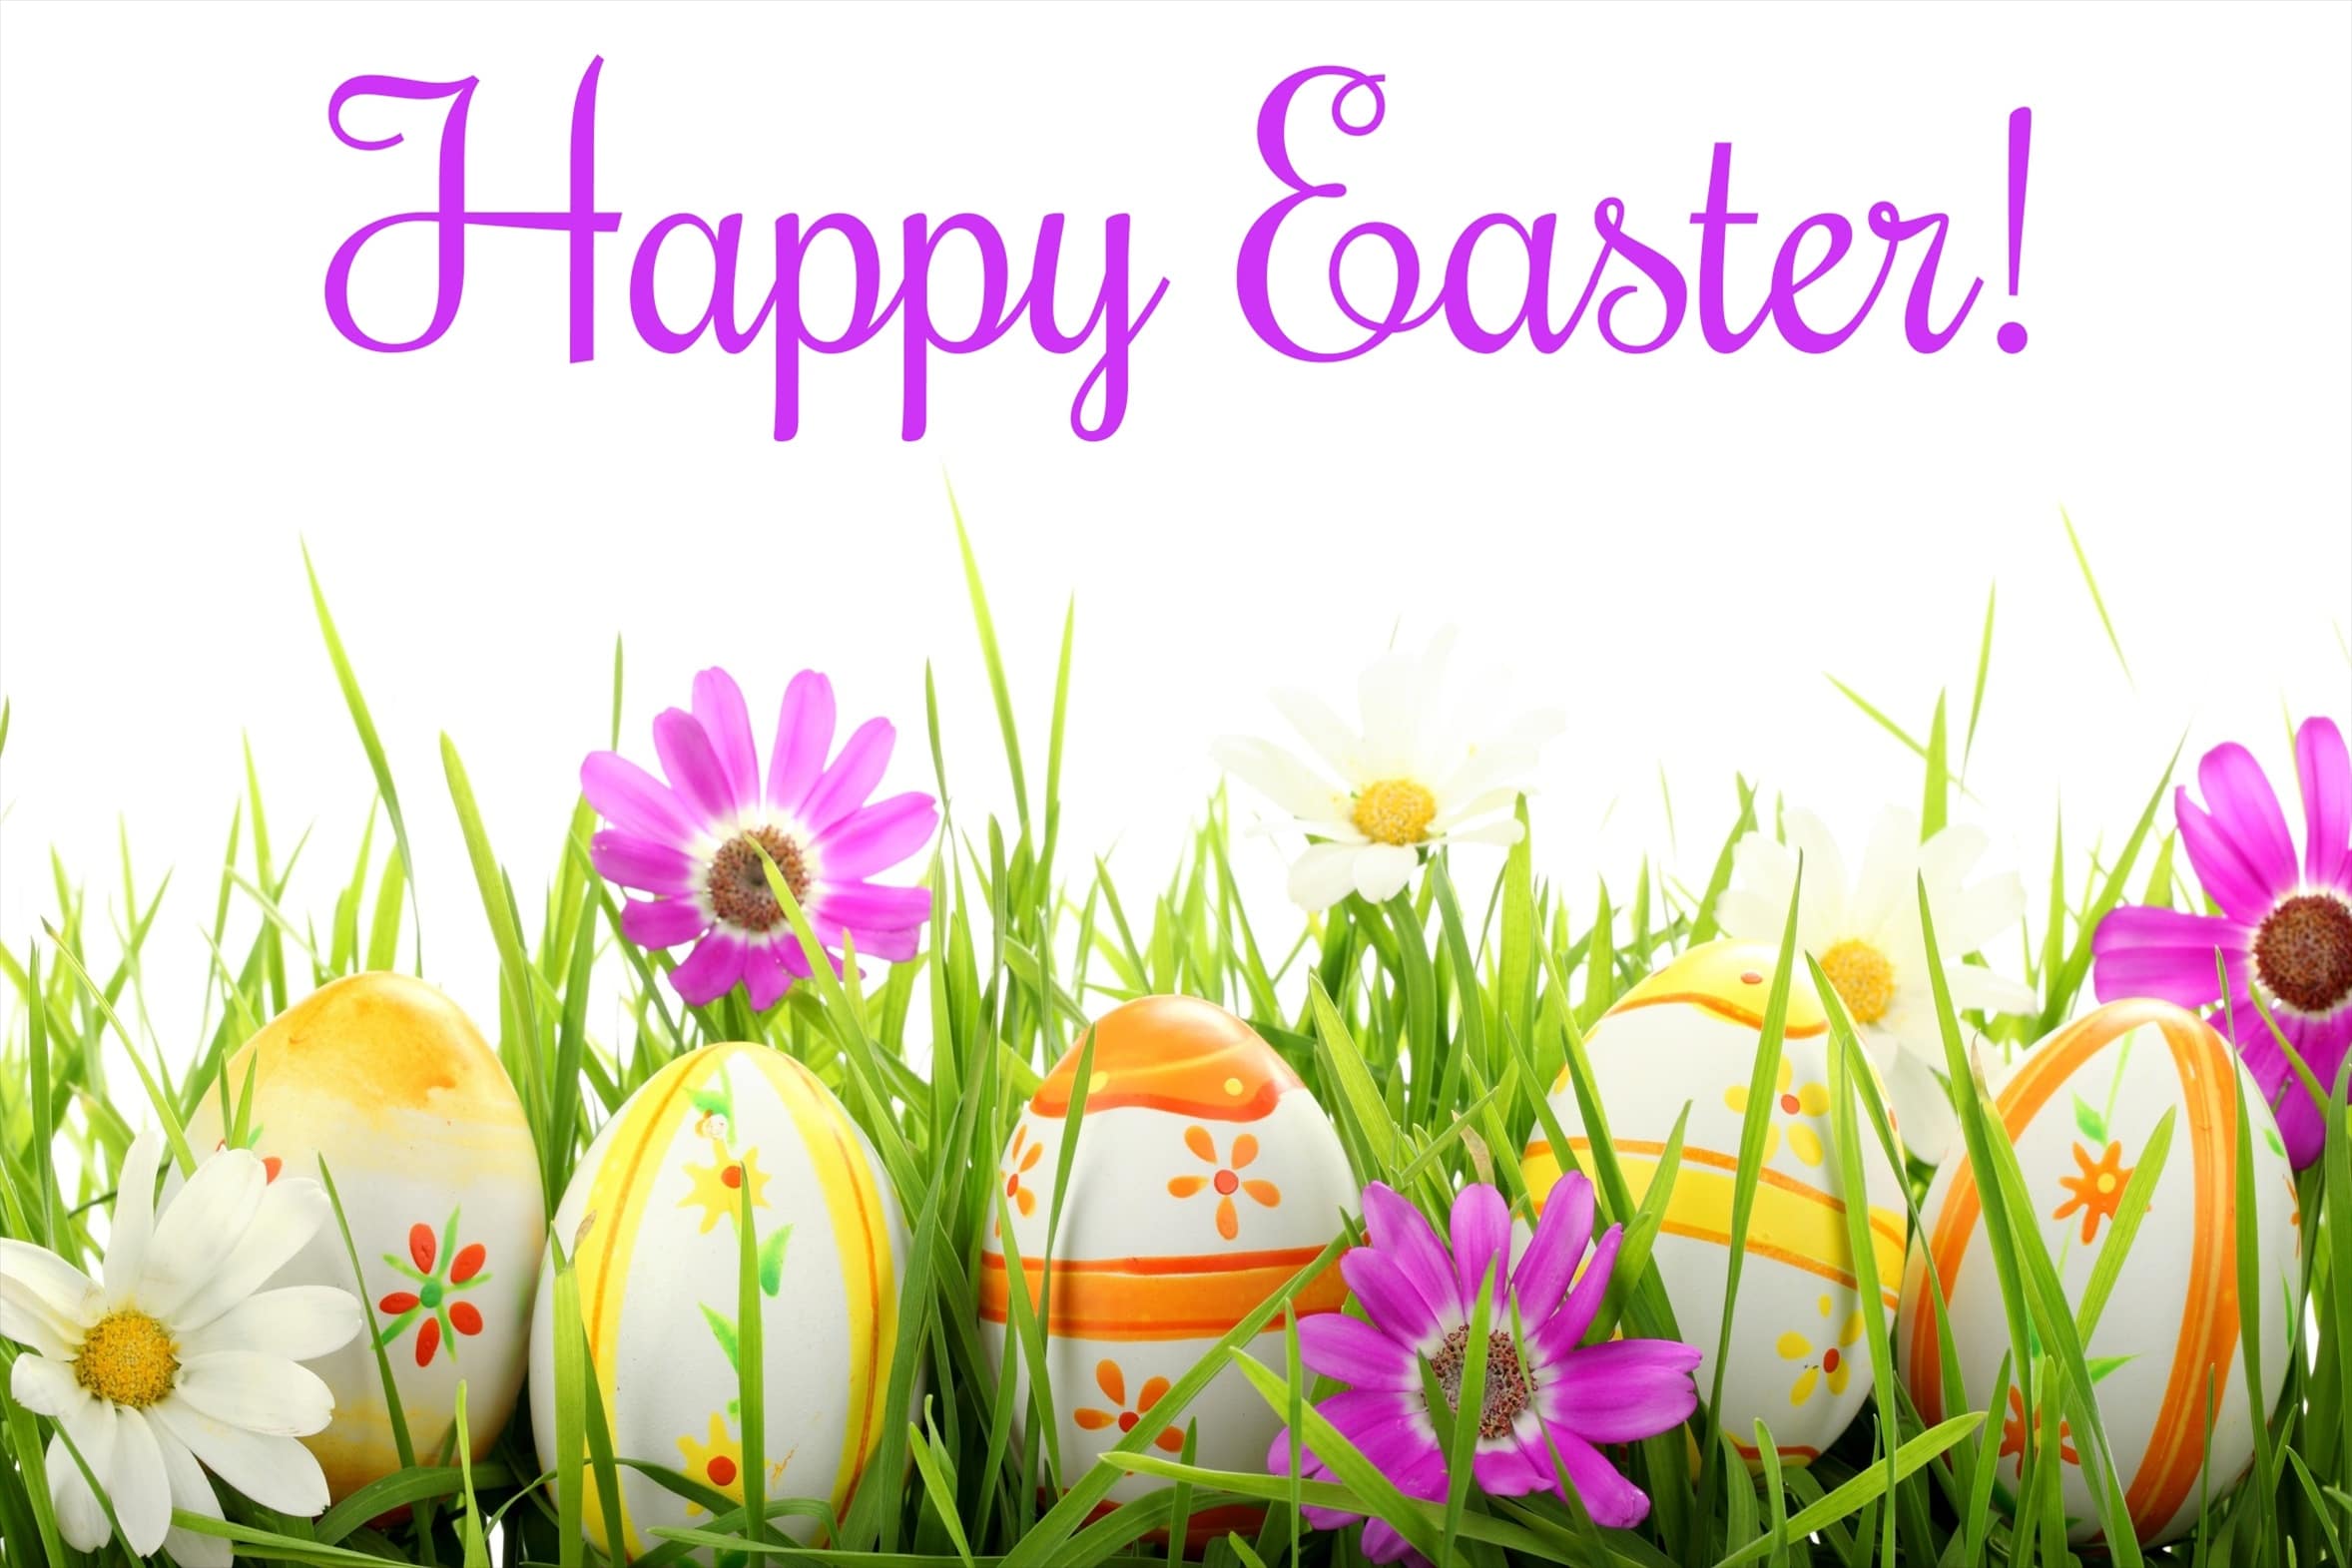 Online Happy Easter 2017 Wishes